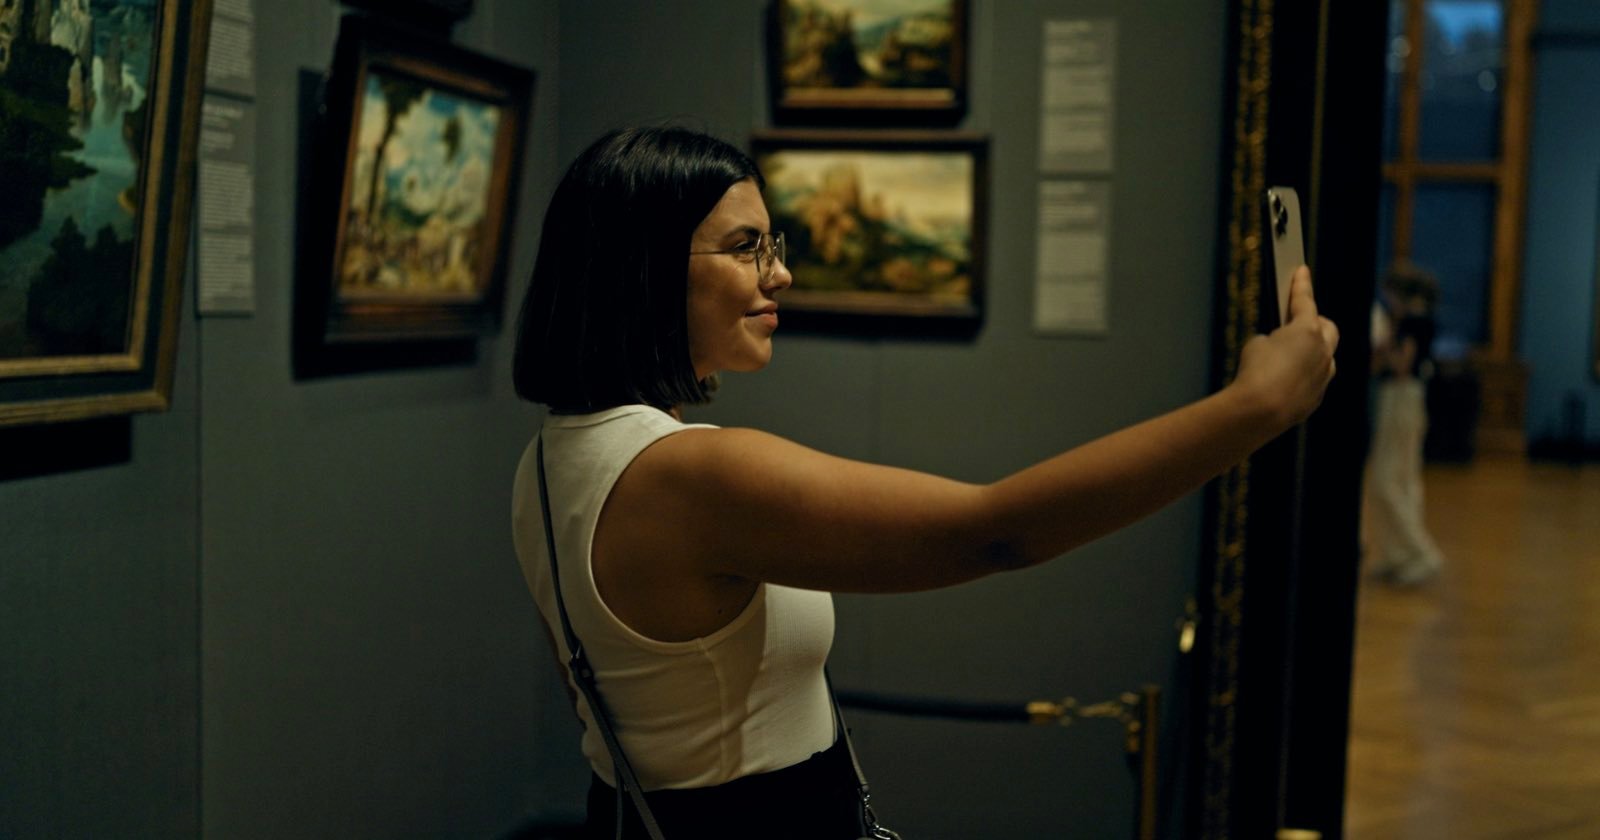  selfie-takers are causing untold damage priceless art galleries 